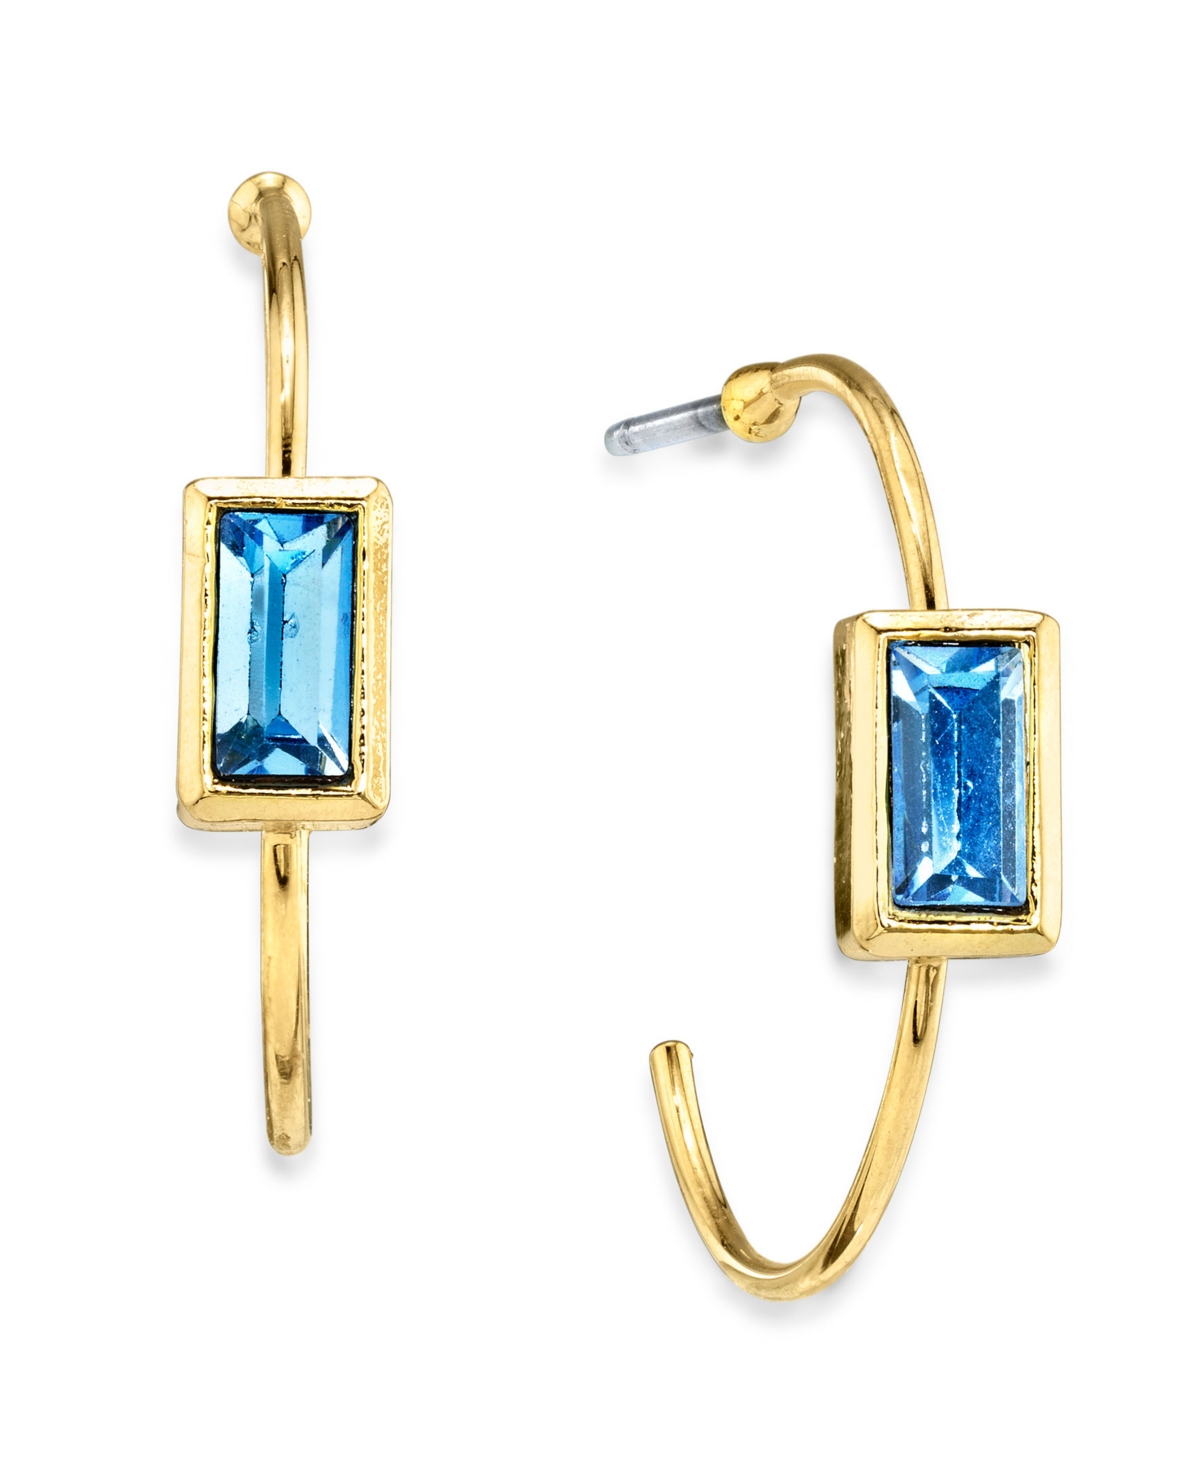 2028 14k Gold Dipped Square Crystal Open Hoop Stainless Steel Post Small Earrings In Blue